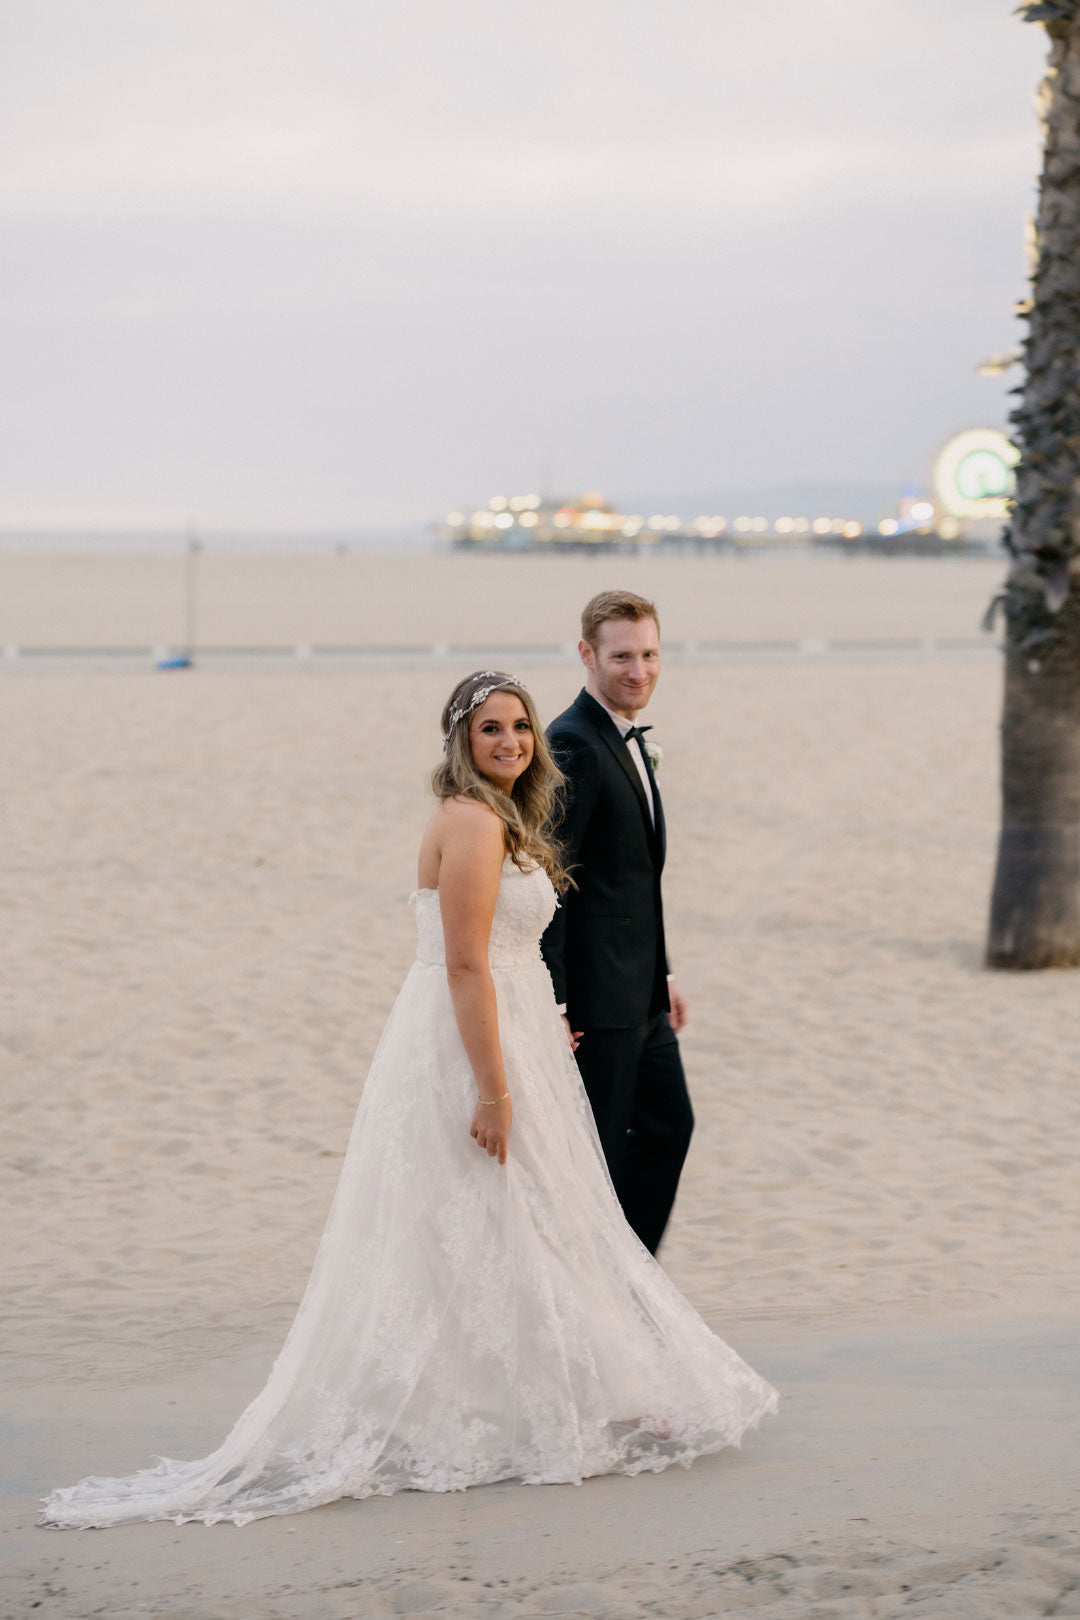 Bride and groom stroll at beach